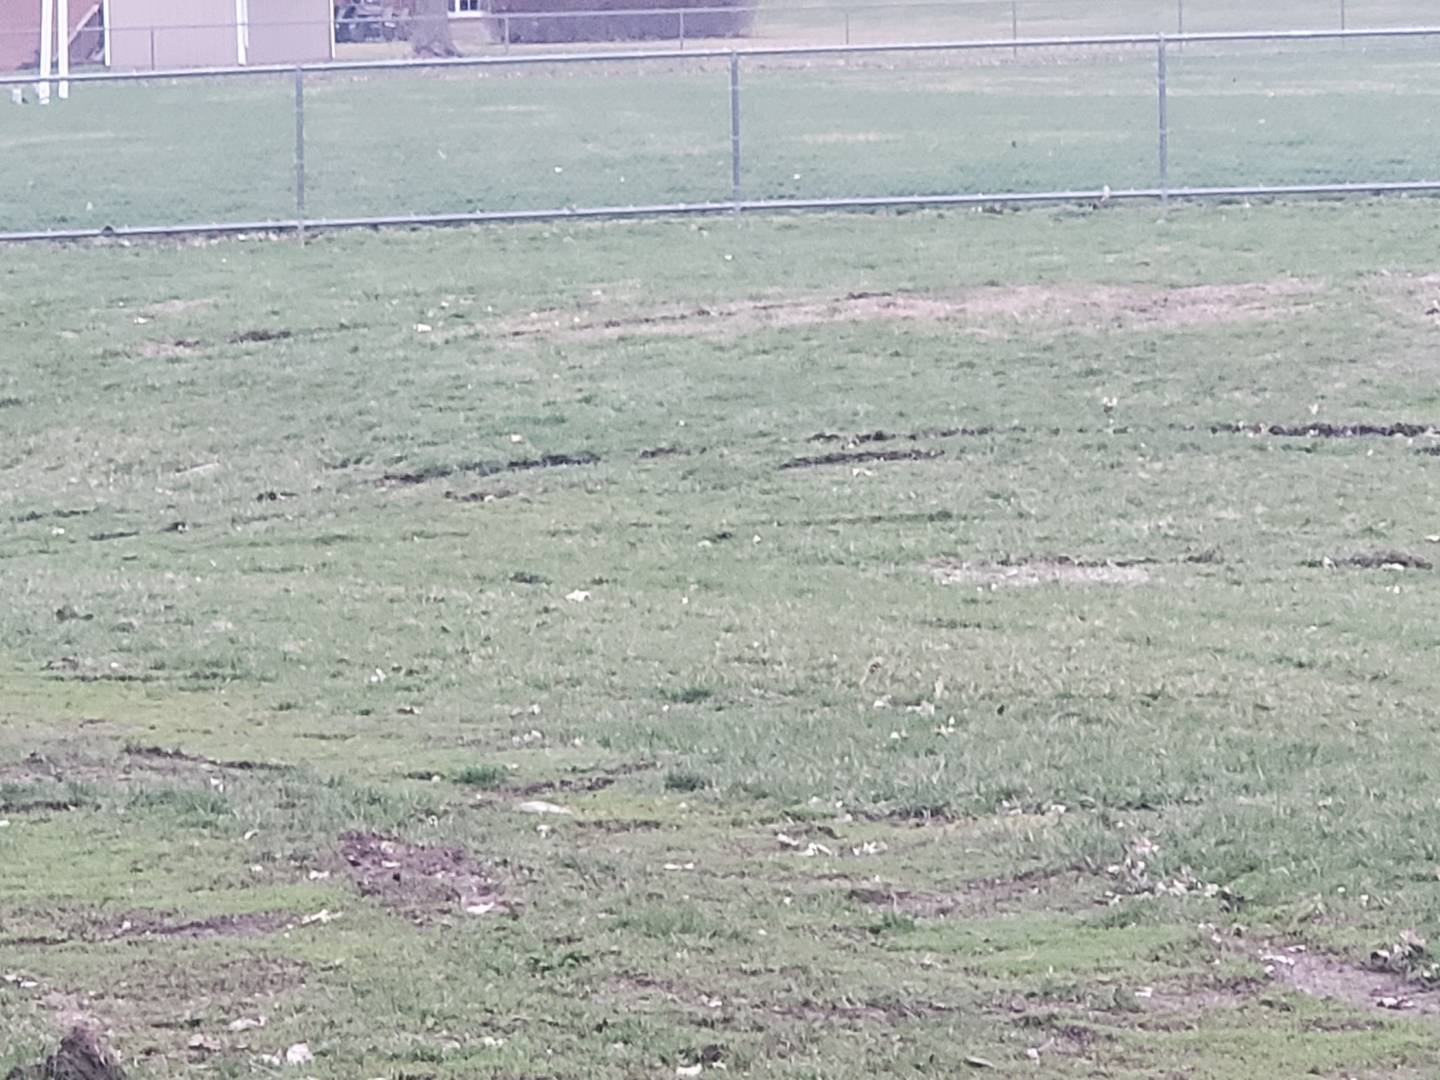 “There was some significant damage done to Kirby Park,” Pellegrini said. “Somebody felt compelled to drive their pick-up through the park and do donuts. They tore it up pretty significantly. Don’t come to Spring Valley and think you are going to get away with it because our police force got this guy.”